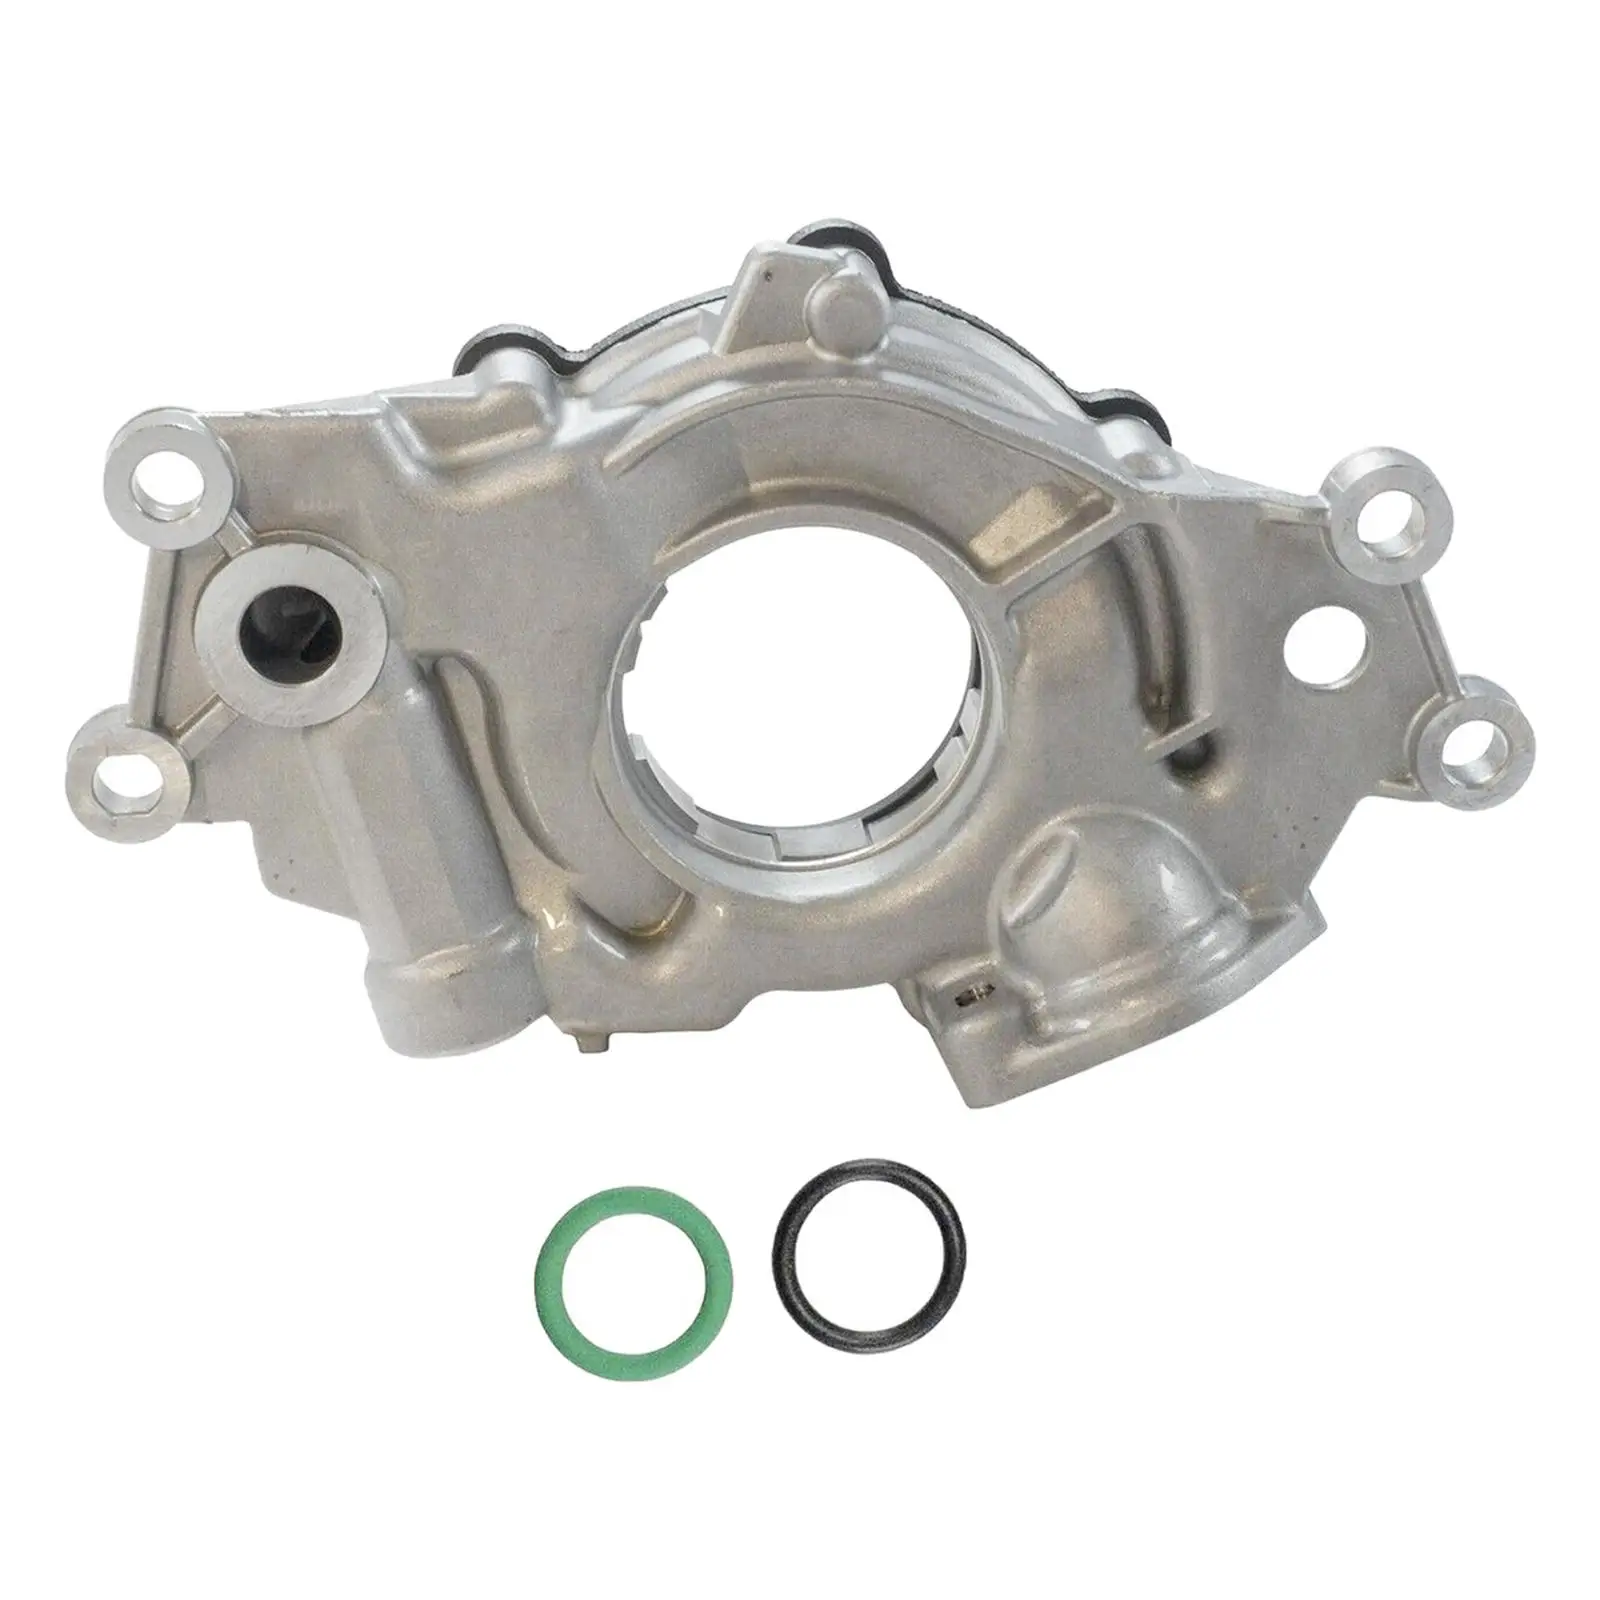 Engine Oil Pump Replacement Easy to Install Hi Volume Oil Pumps for Gen 4 Ls-based Engines 5.3L 6.0L 6.2L L99 LC9 Lmf L94